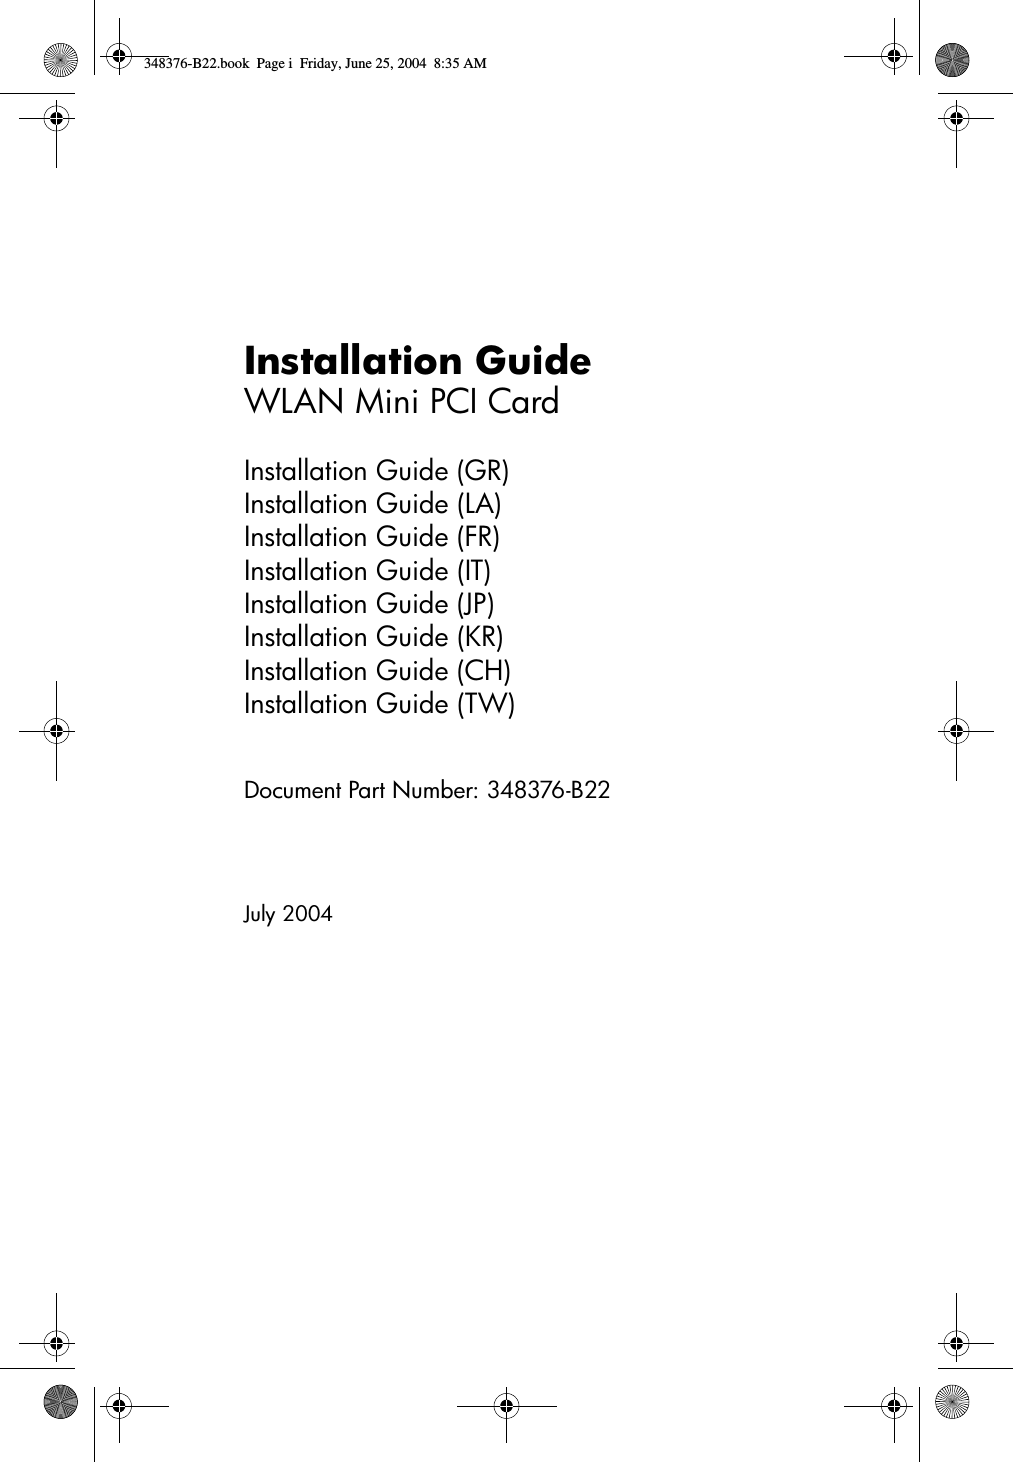 Installation GuideWLAN Mini PCI CardInstallation Guide (GR)Installation Guide (LA)Installation Guide (FR)Installation Guide (IT)Installation Guide (JP)Installation Guide (KR)Installation Guide (CH)Installation Guide (TW)Document Part Number: 348376-B22July 2004348376-B22.book  Page i  Friday, June 25, 2004  8:35 AM